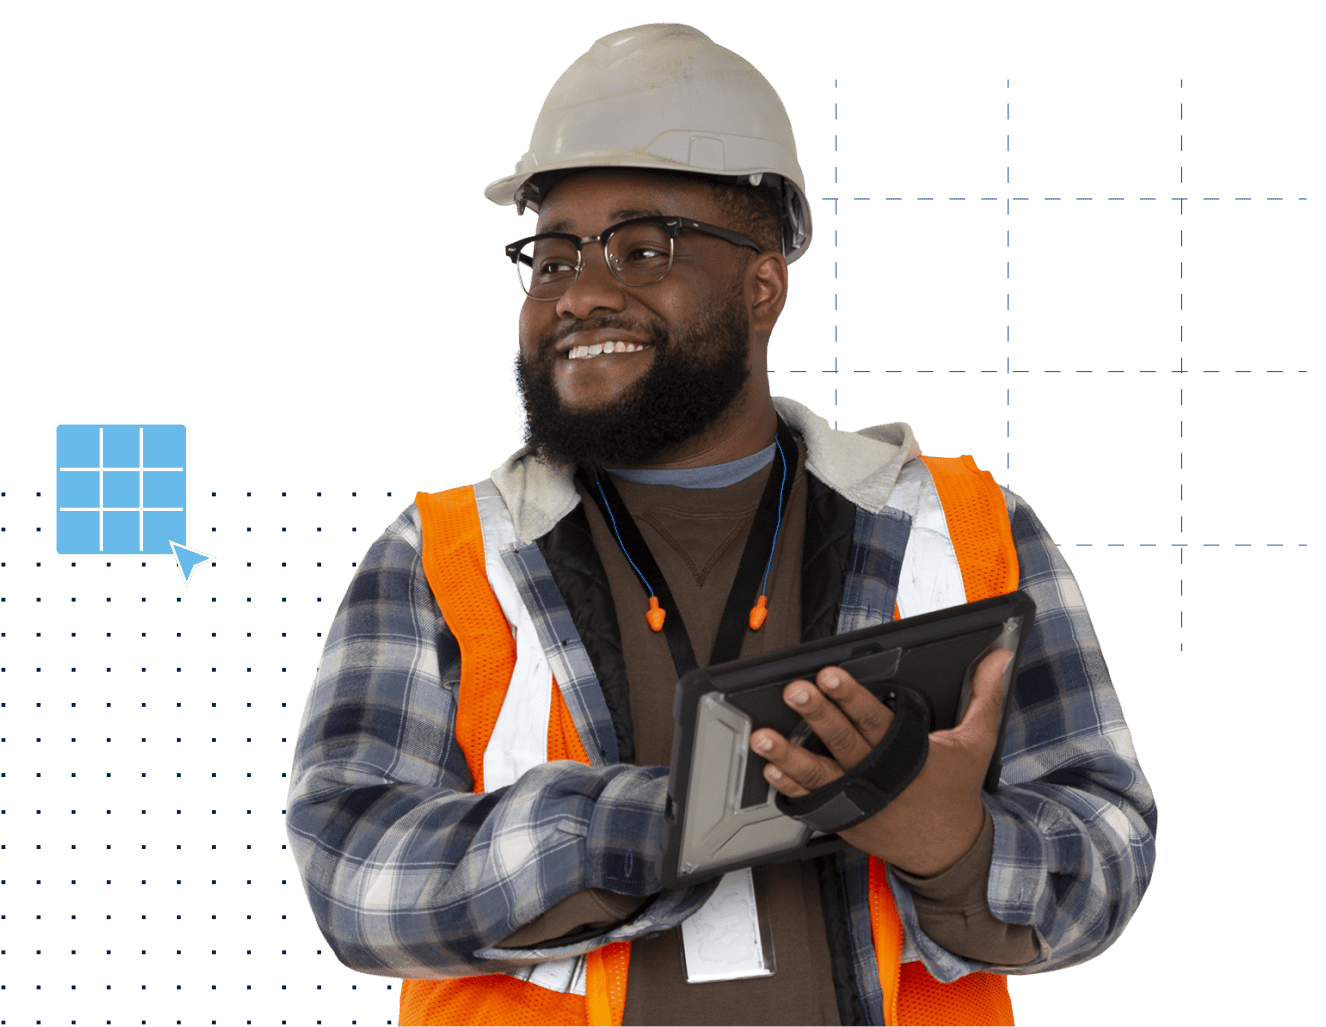 smiling male contractor wearing a hard hat and vest using a tablet